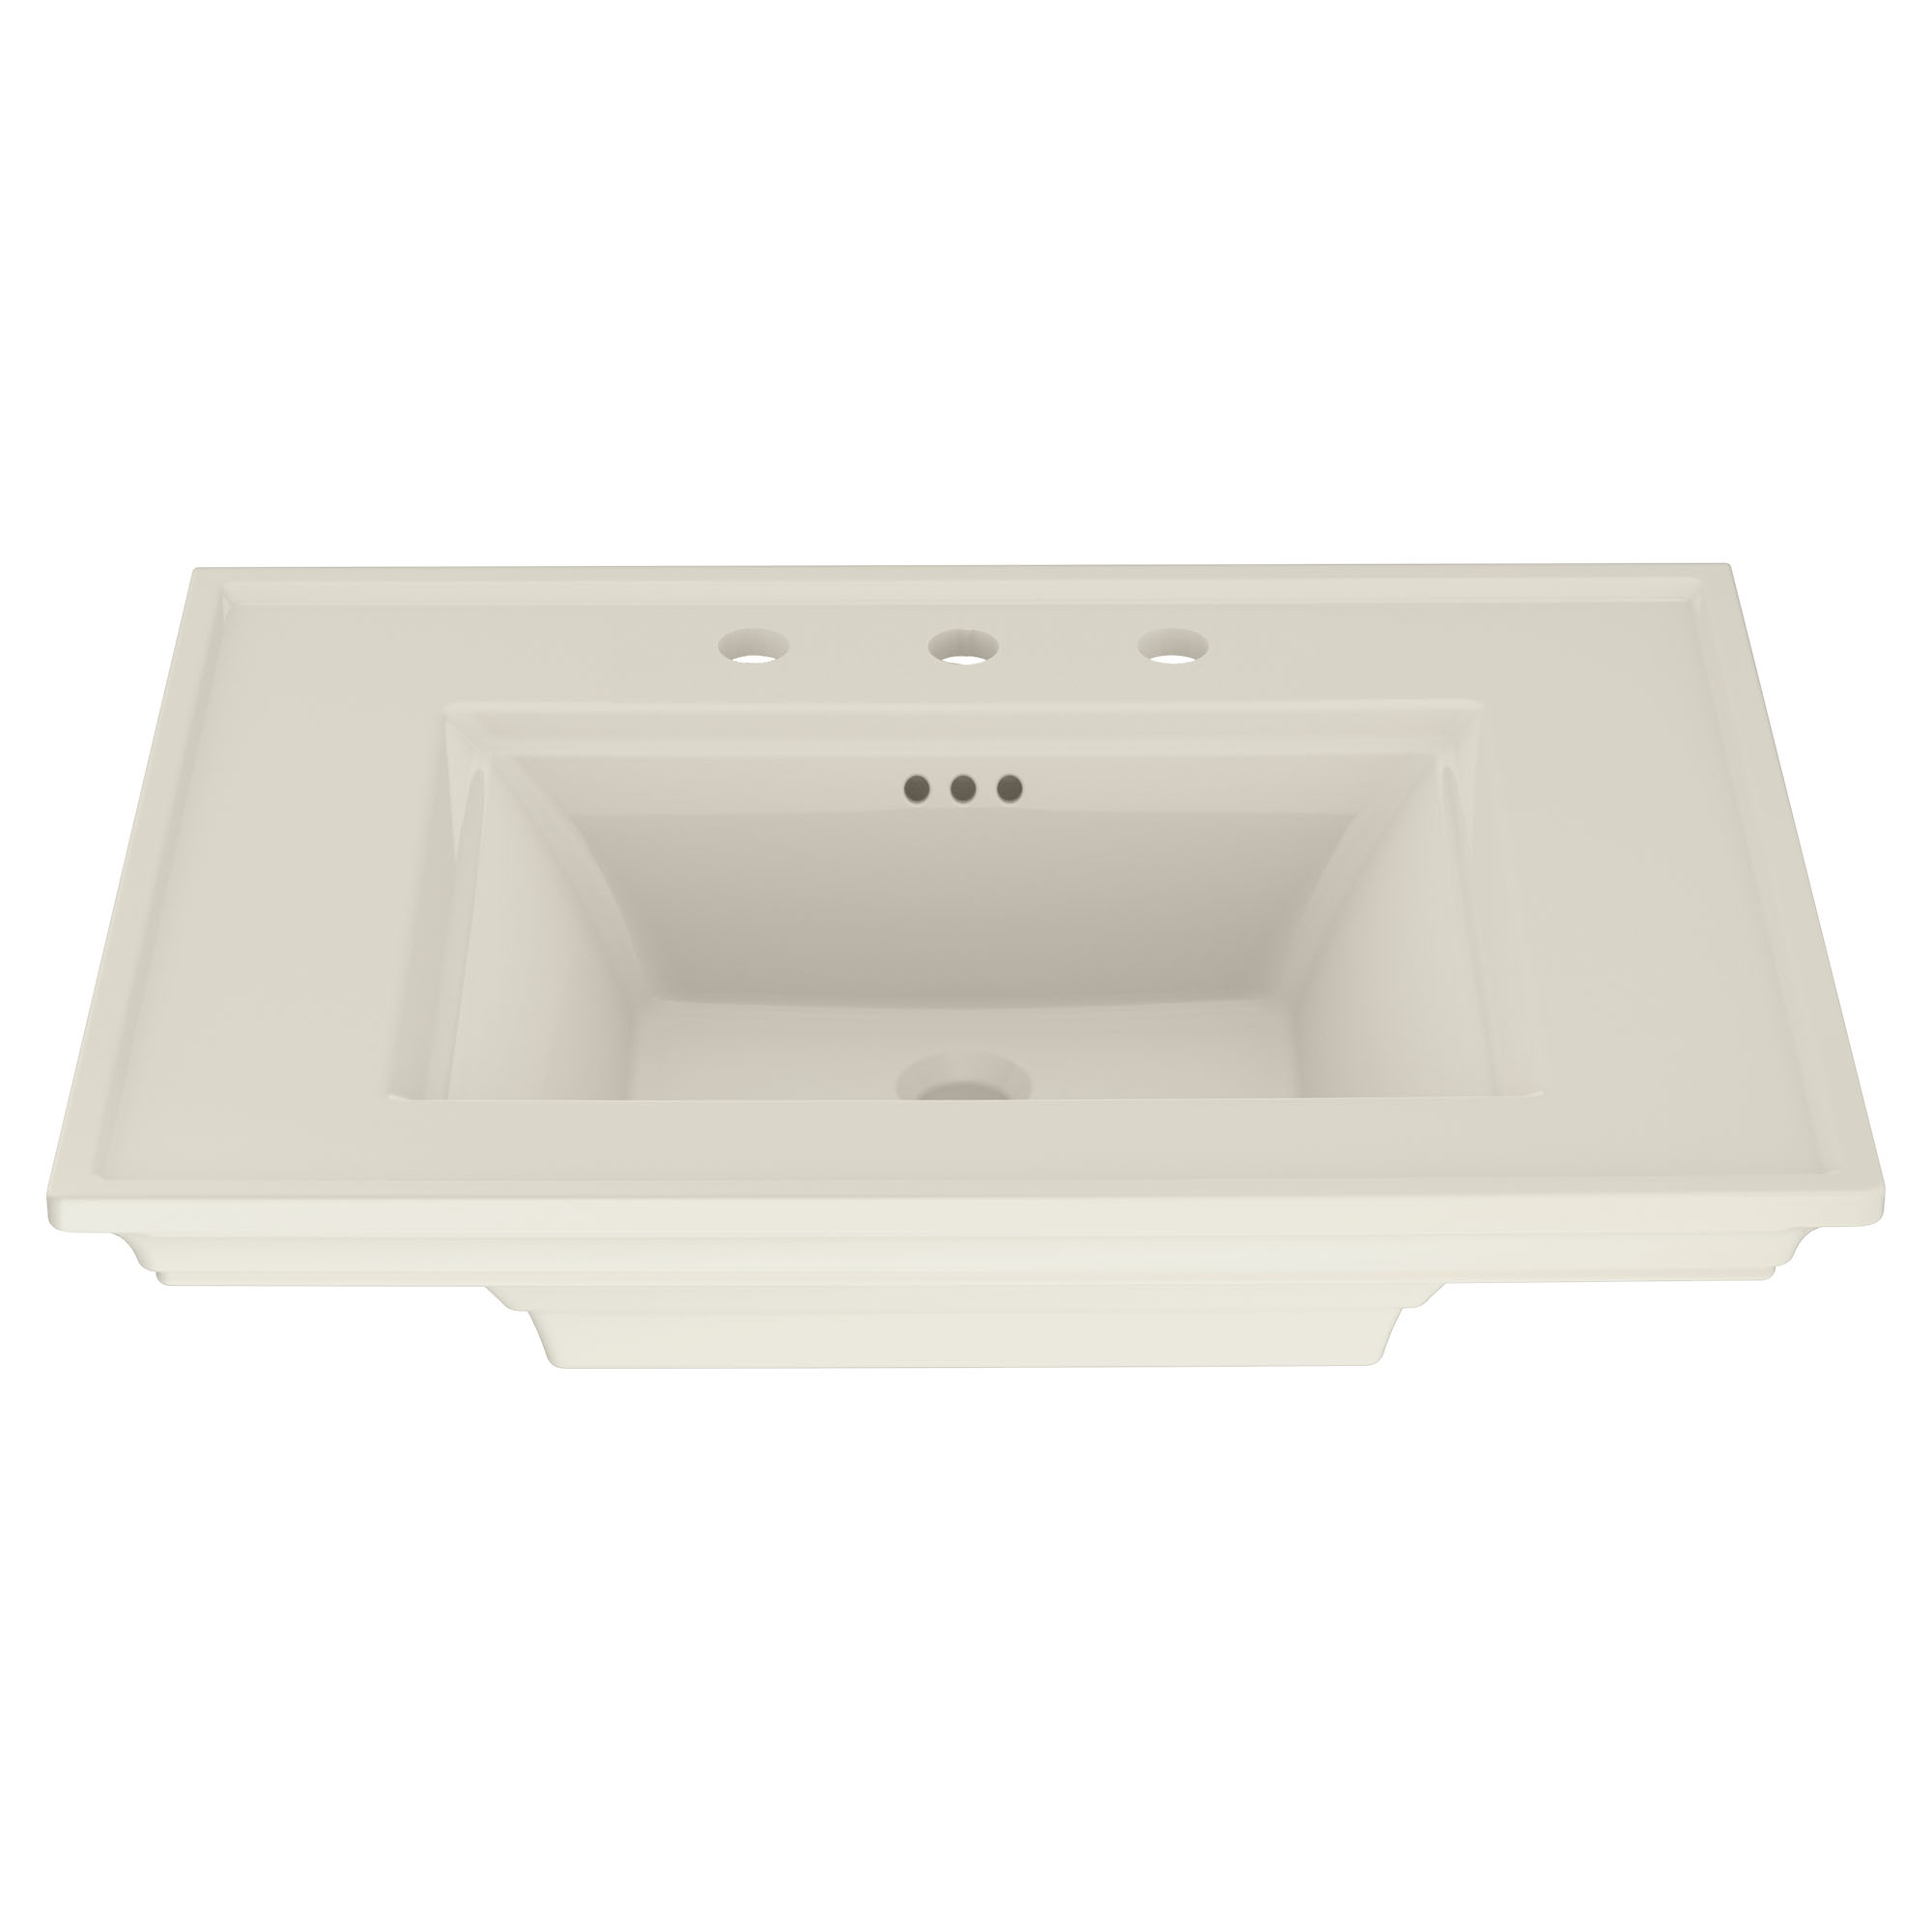 Town Square® S 8-Inch Widespread Pedestal Sink Top